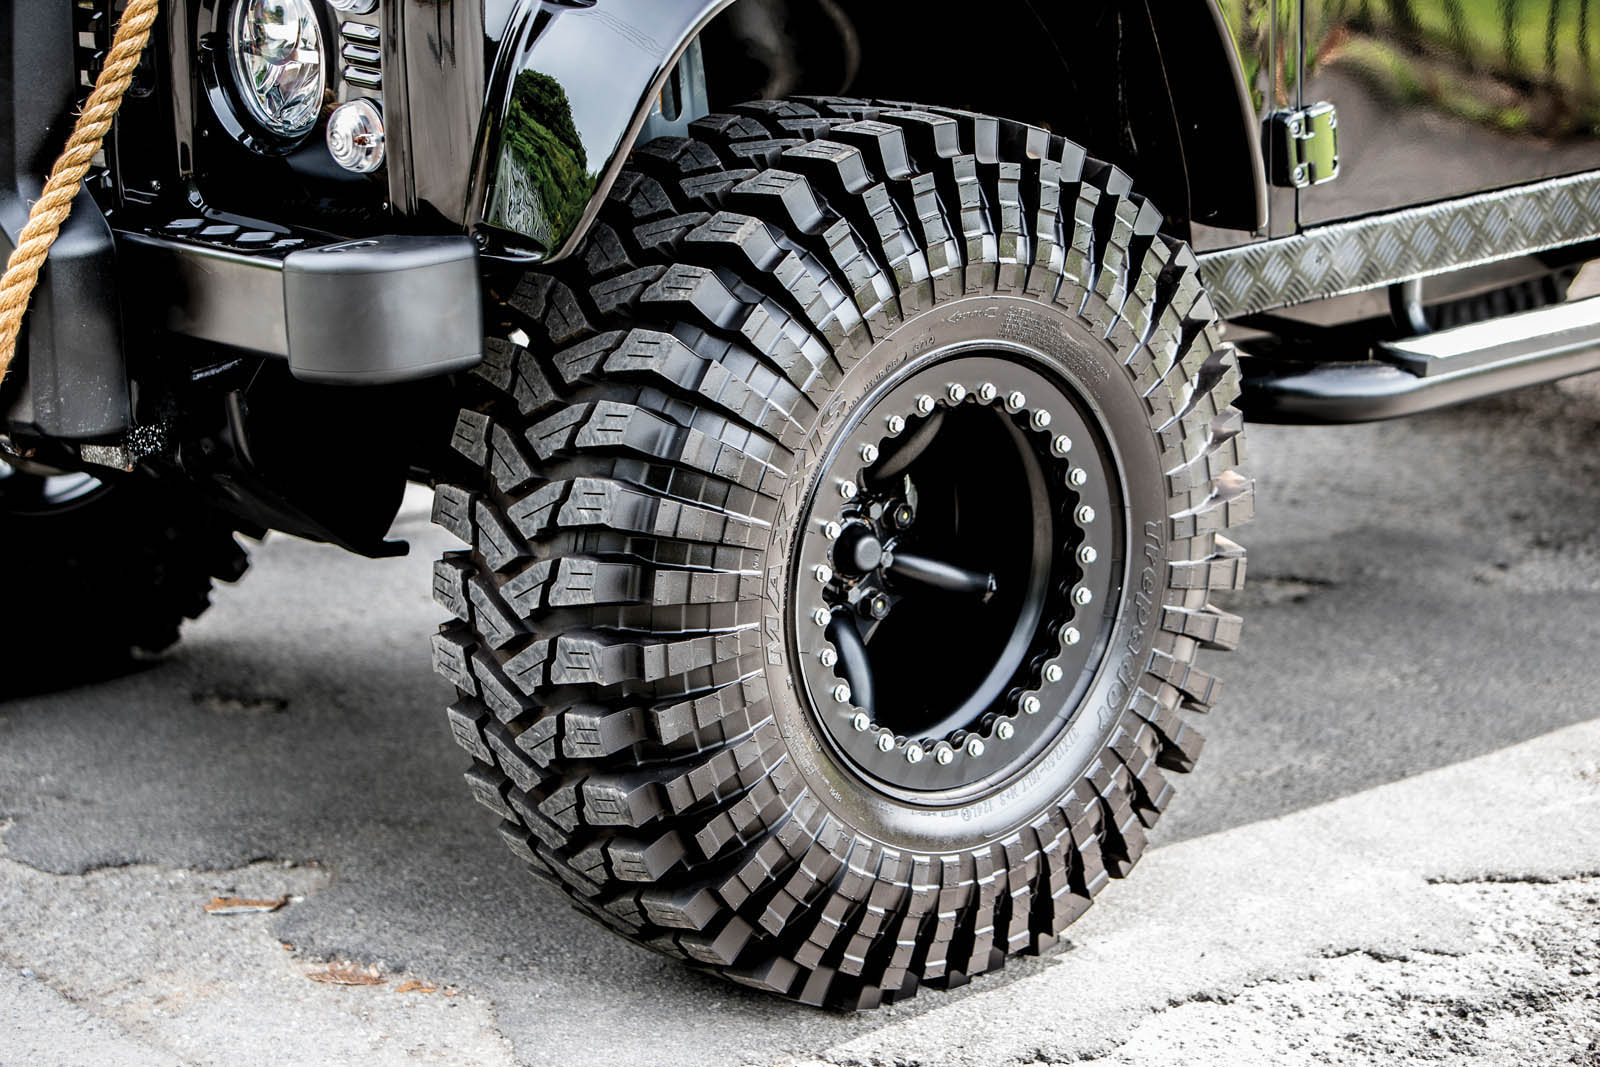 33 defender. Maxxis m8060. Максис трепадор 8060. Шины Maxxis Trepador m-8060. Maxxis Trepador bias m8060.